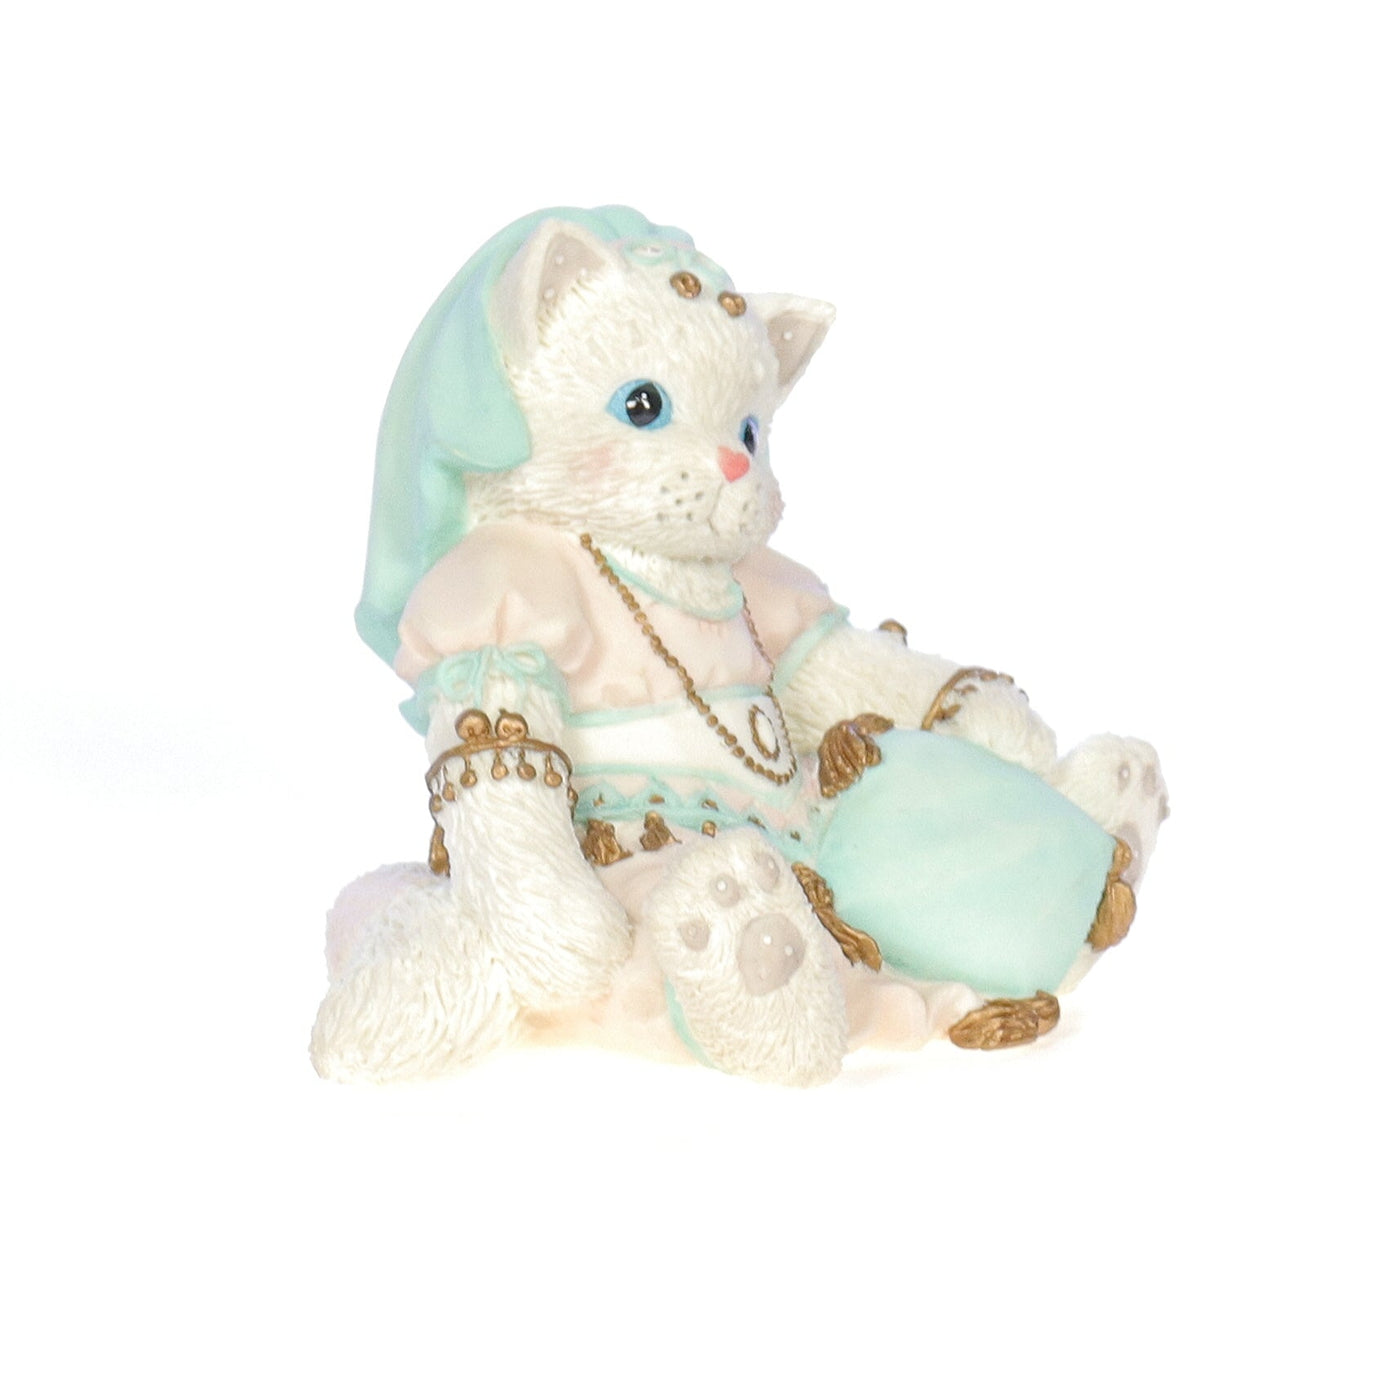 Calico_Kittens_Friendship_Has_Many_Riches_Friendship_Figurine_1994